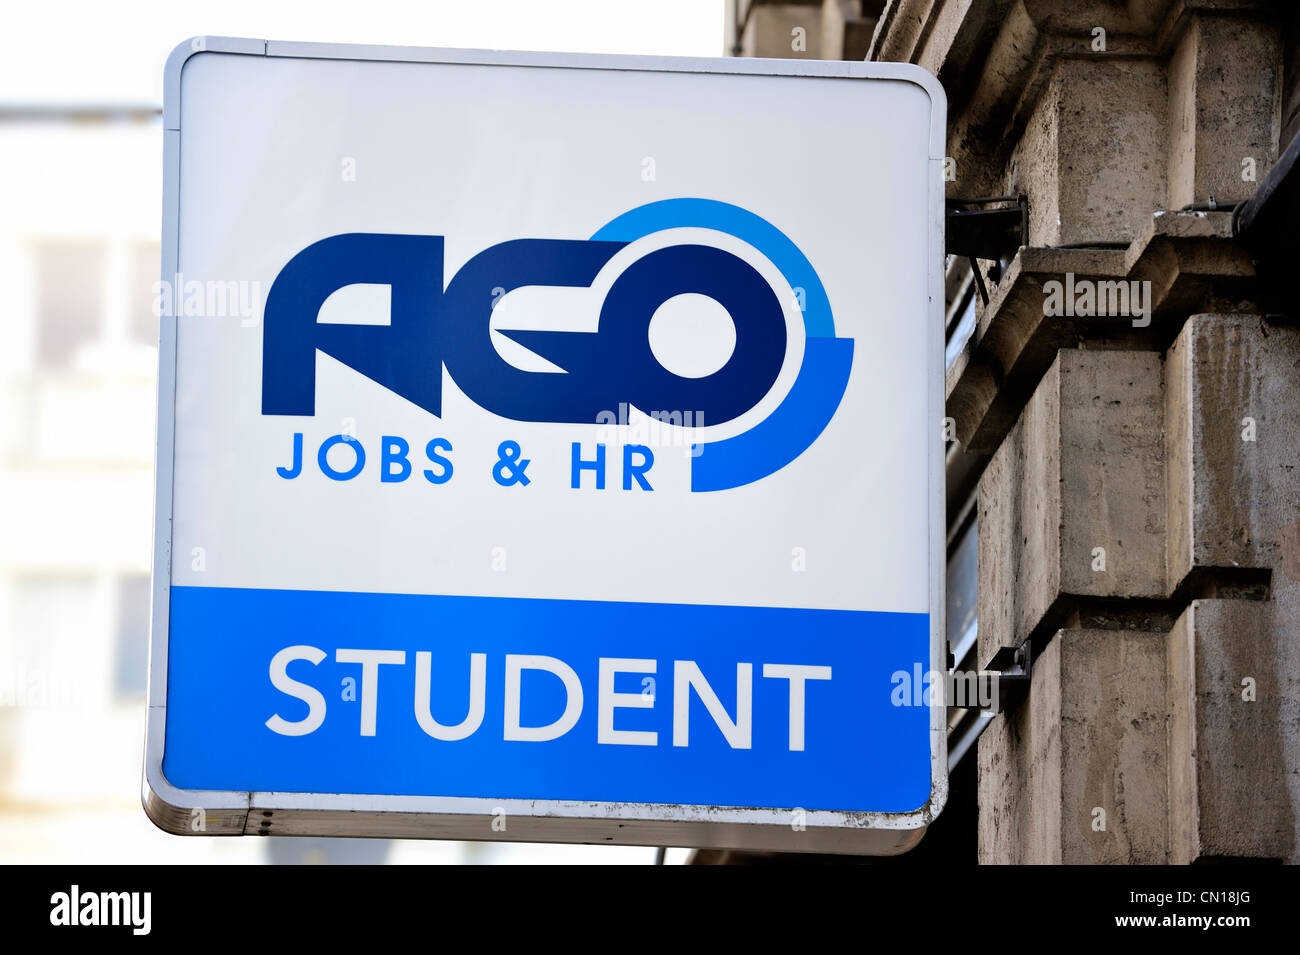 Signboard with logo for temporary employment agency AGO Interim contracting students, Flanders, Belgium Stock Photo